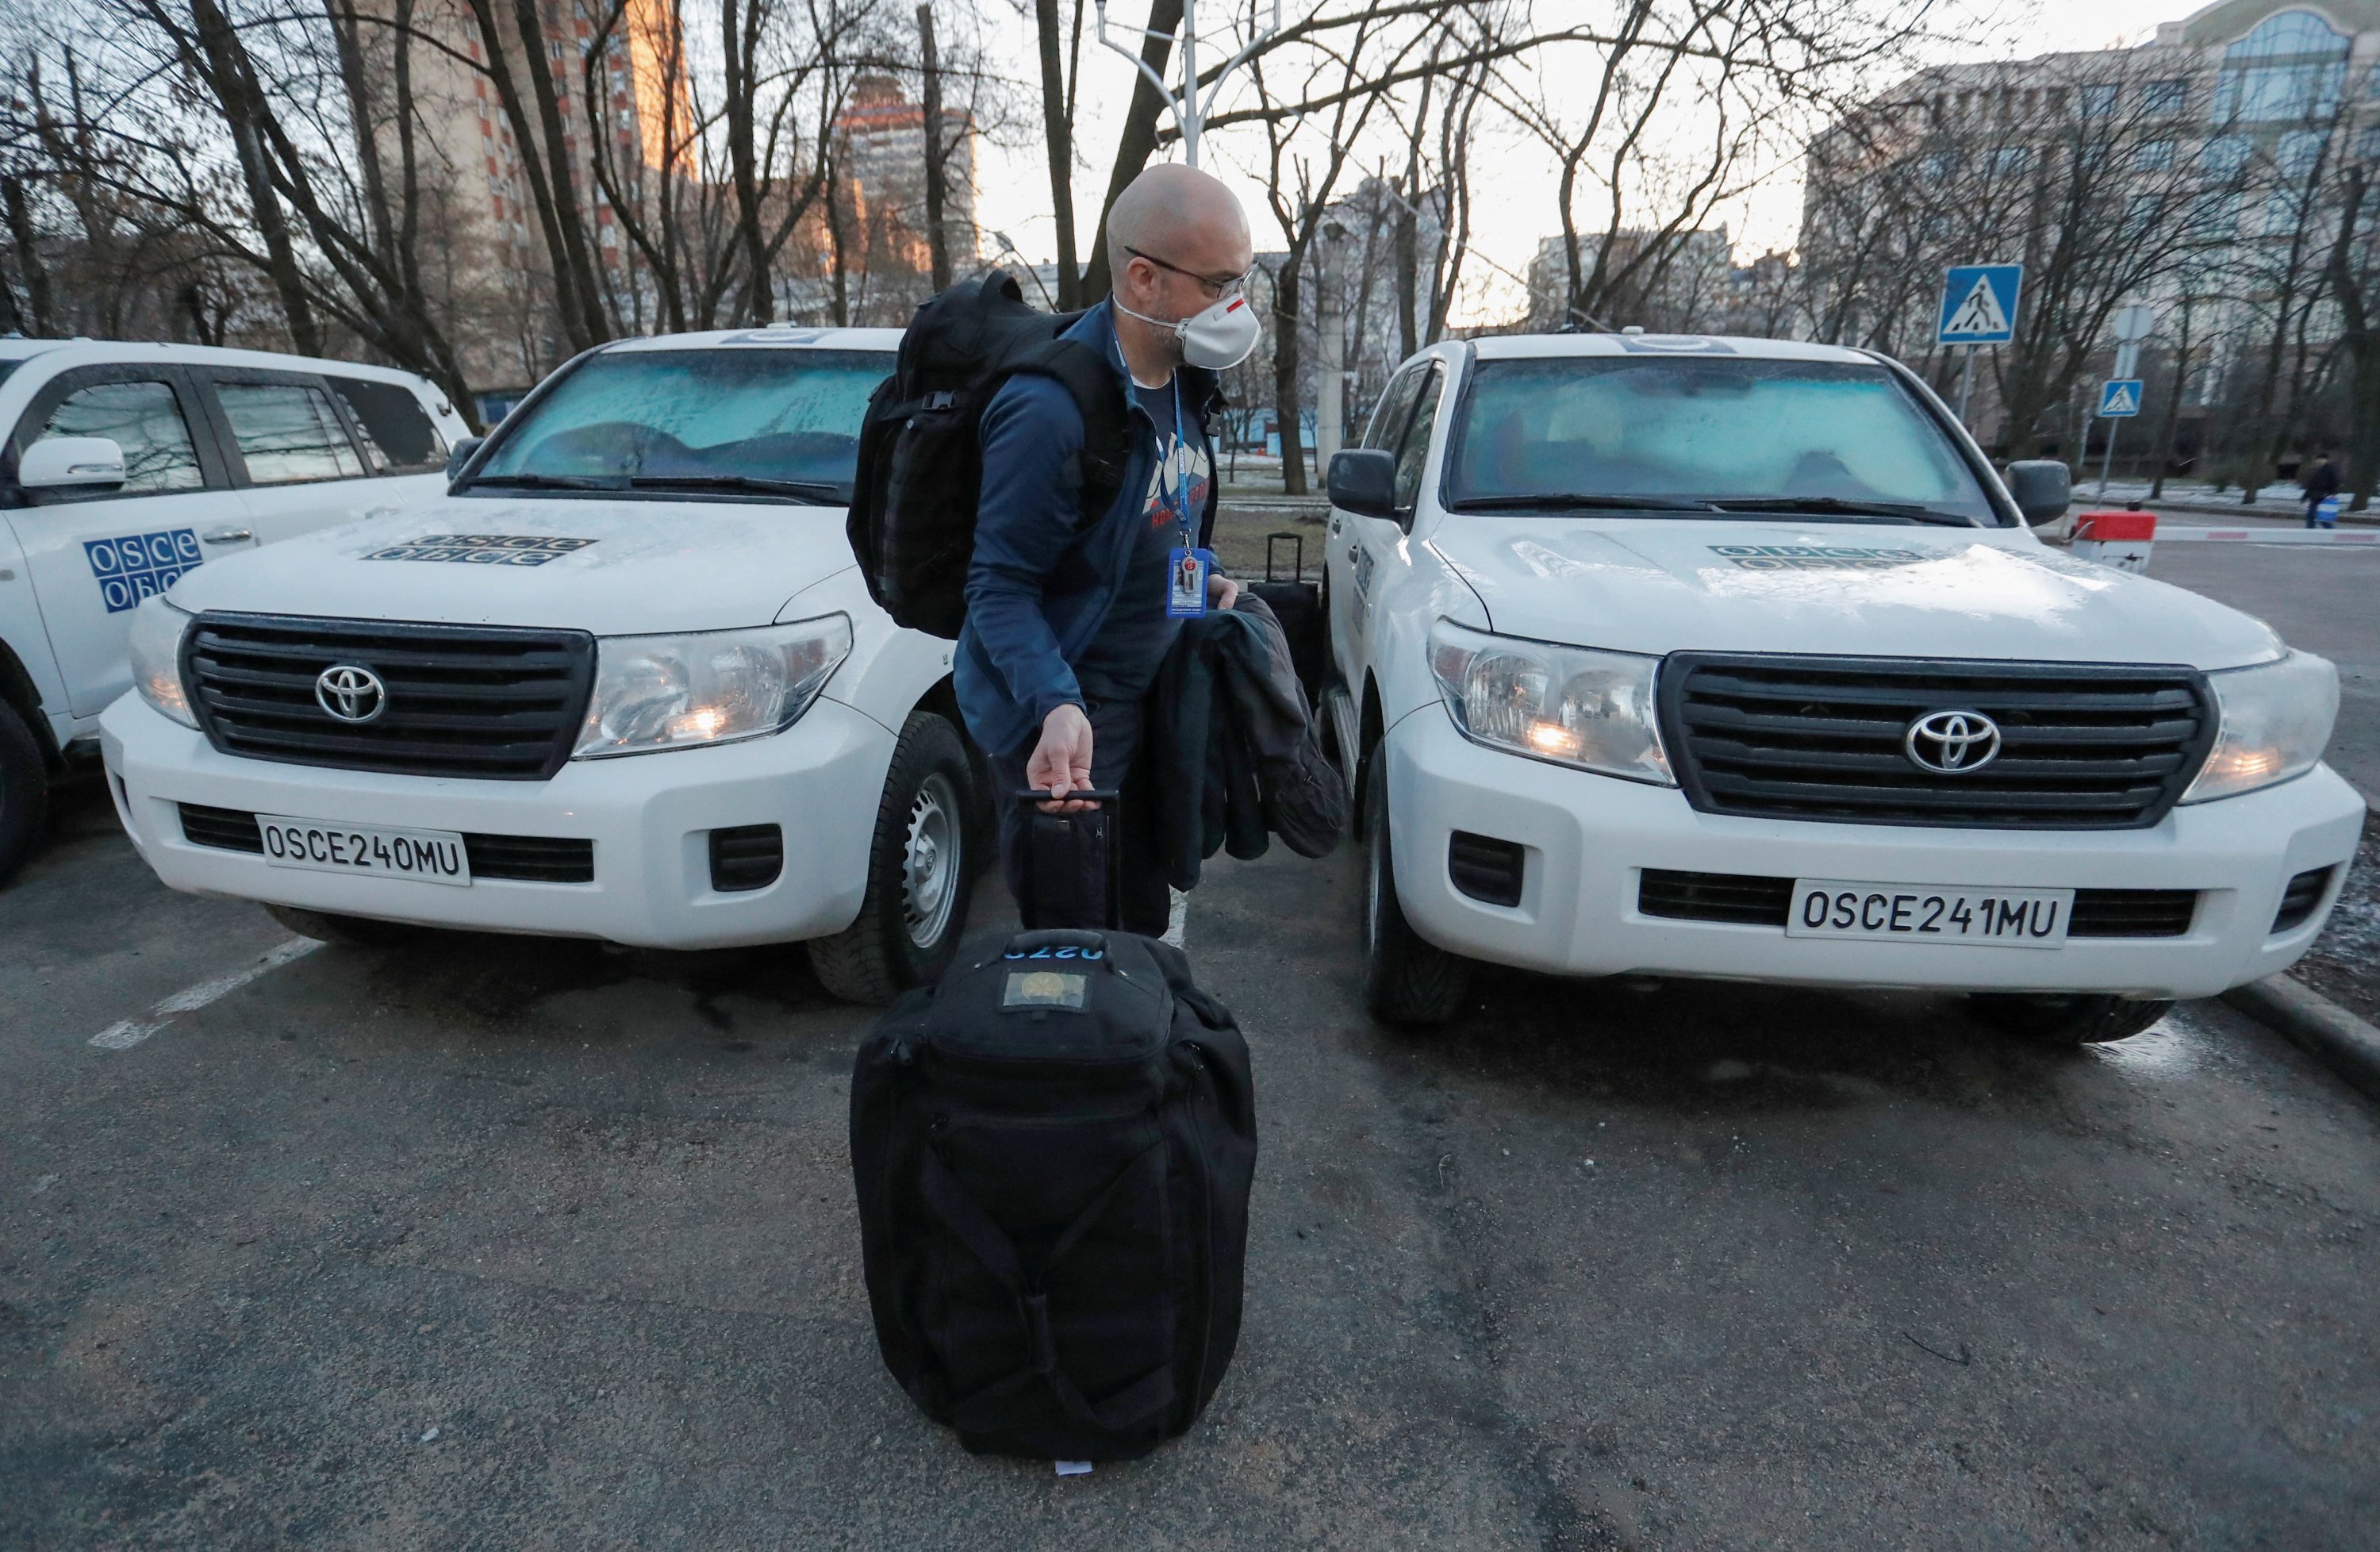 A member of the Organization for Security and Co-operation in Europe (OSCE) loads luggage before leaving the Park Inn hotel housing the monitoring mission in the rebel-controlled city of Donetsk, Ukraine, Feb. 13, 2022. (Reuters Photo)